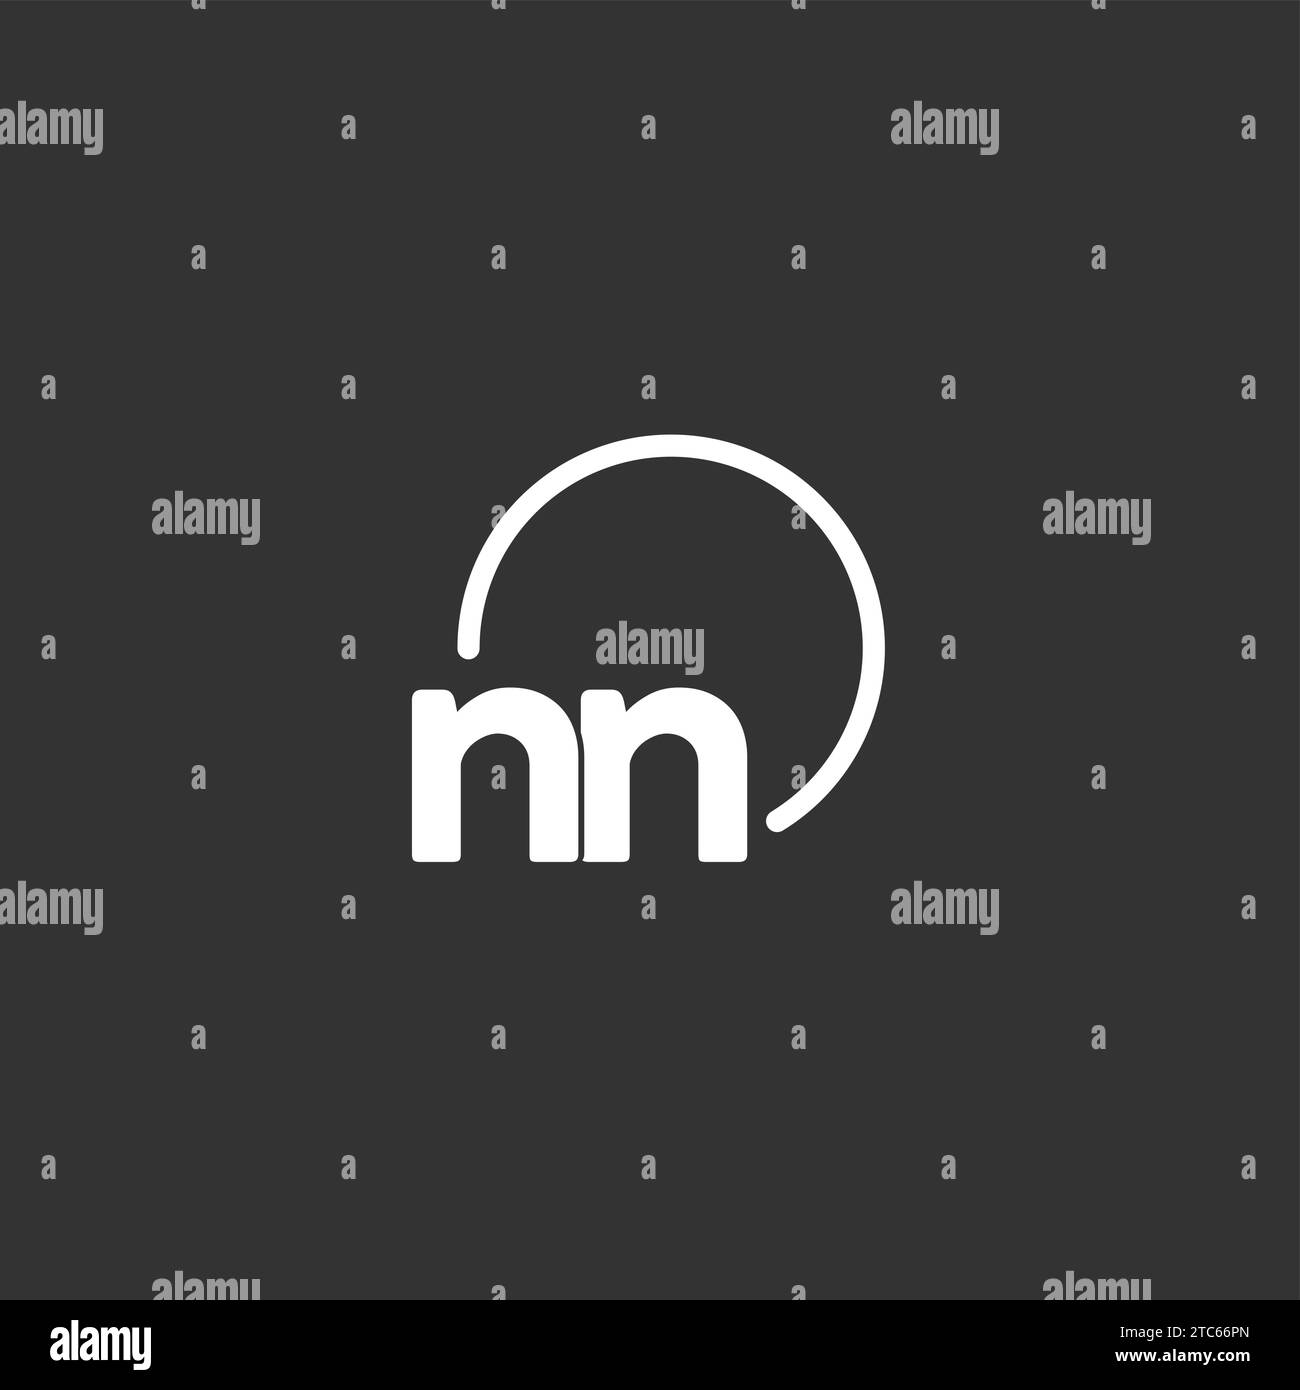 NN initial logo with rounded circle vector graphic Stock Vector